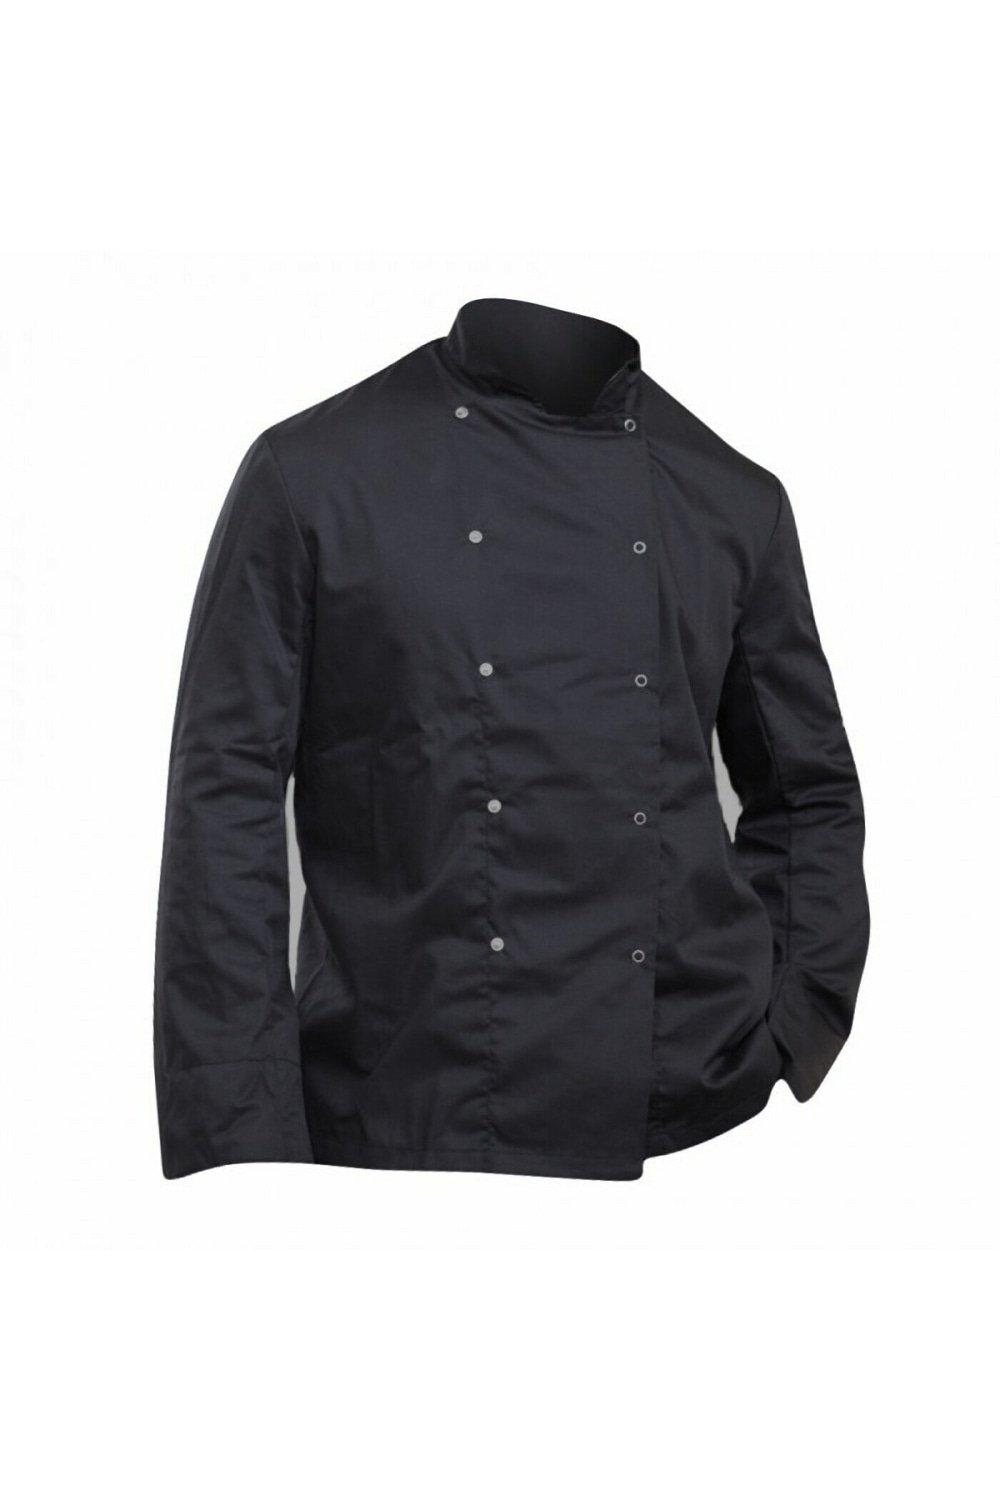 Economy Long Sleeve Chefs Jacket Chefswear Pack of 2